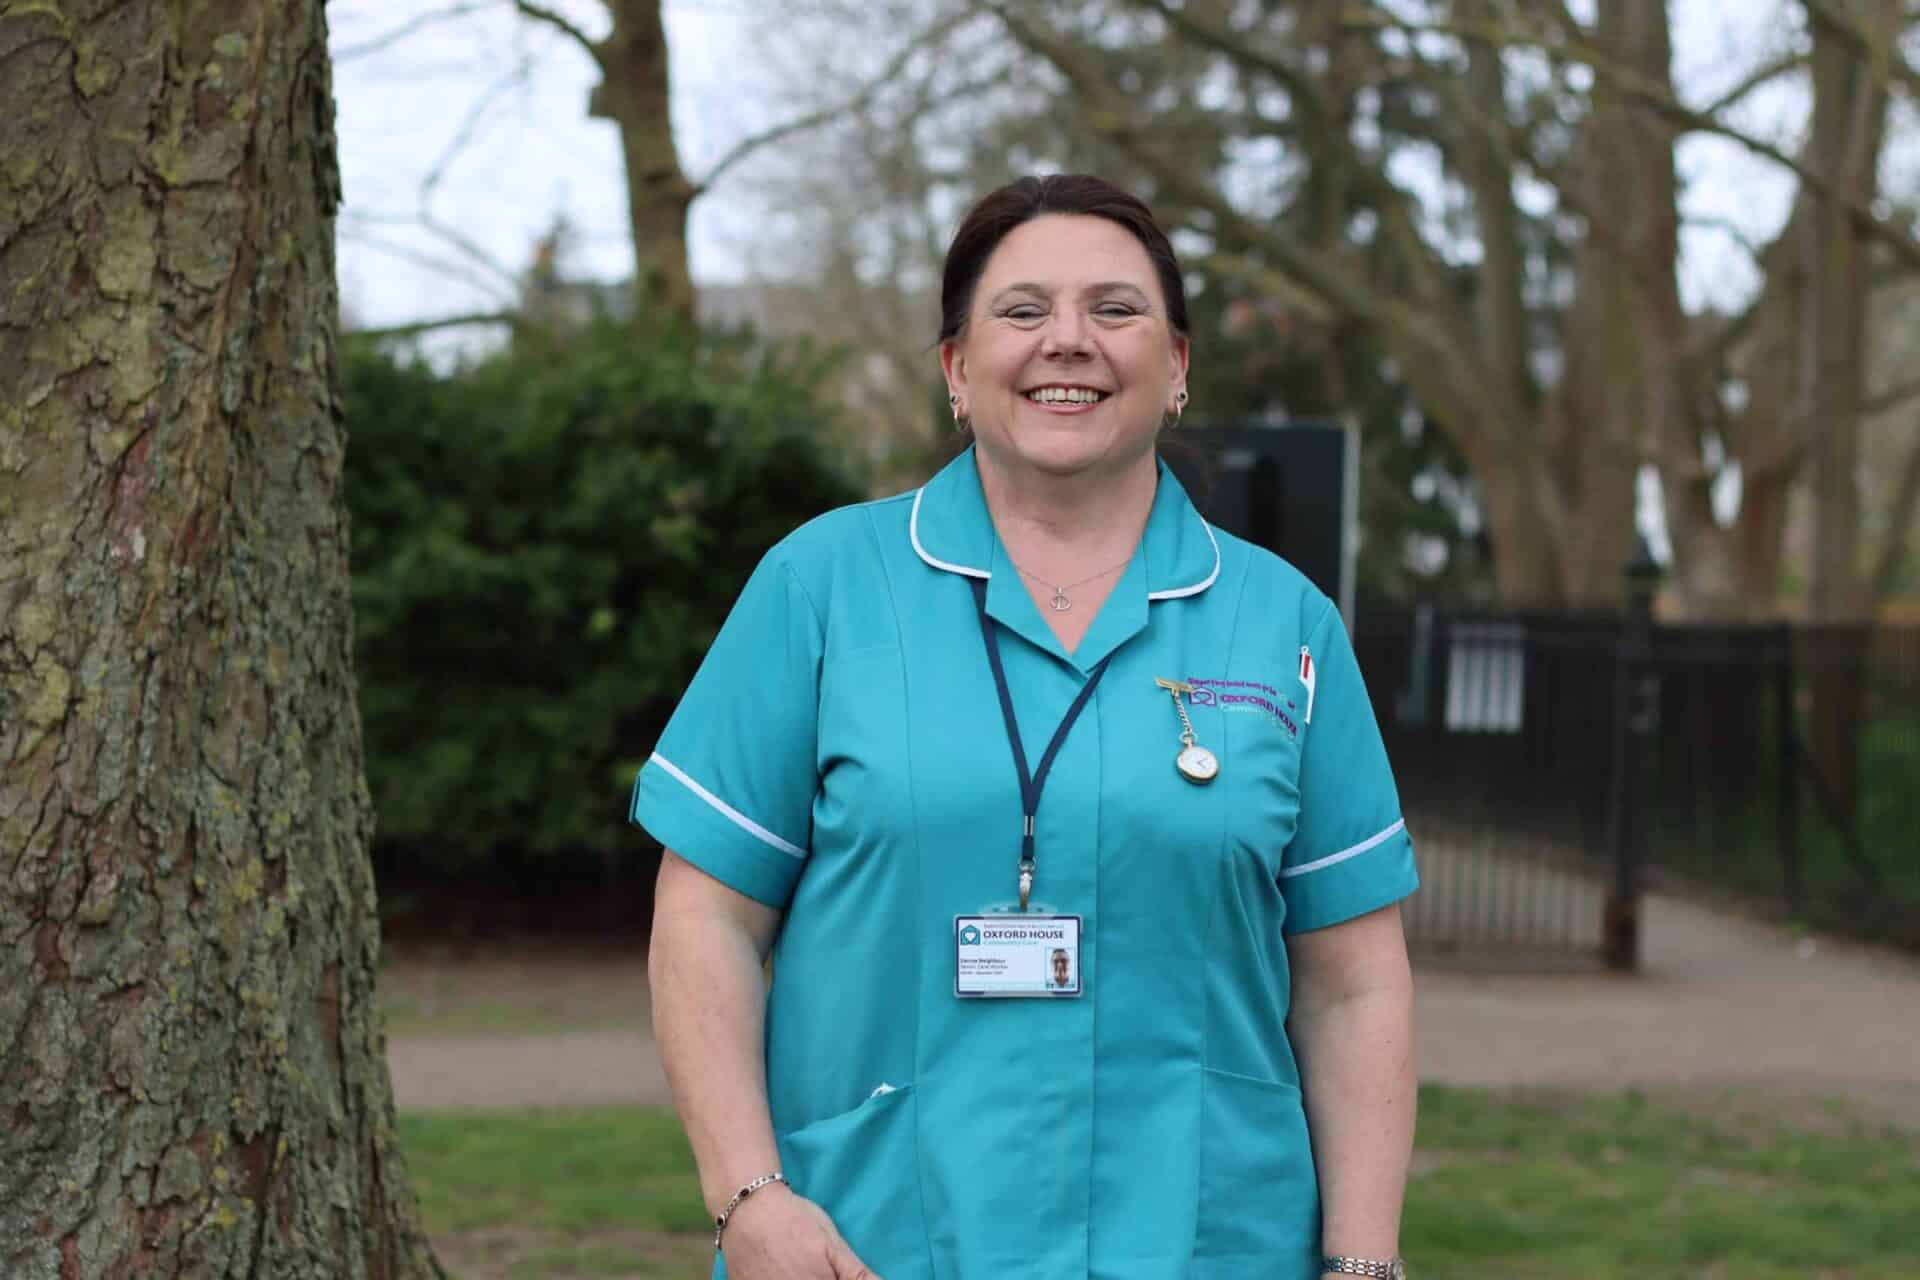 A smiling healthcare professional wearing scrubs and a badge from Oxford House Community Care stands confidently in a park-like setting.